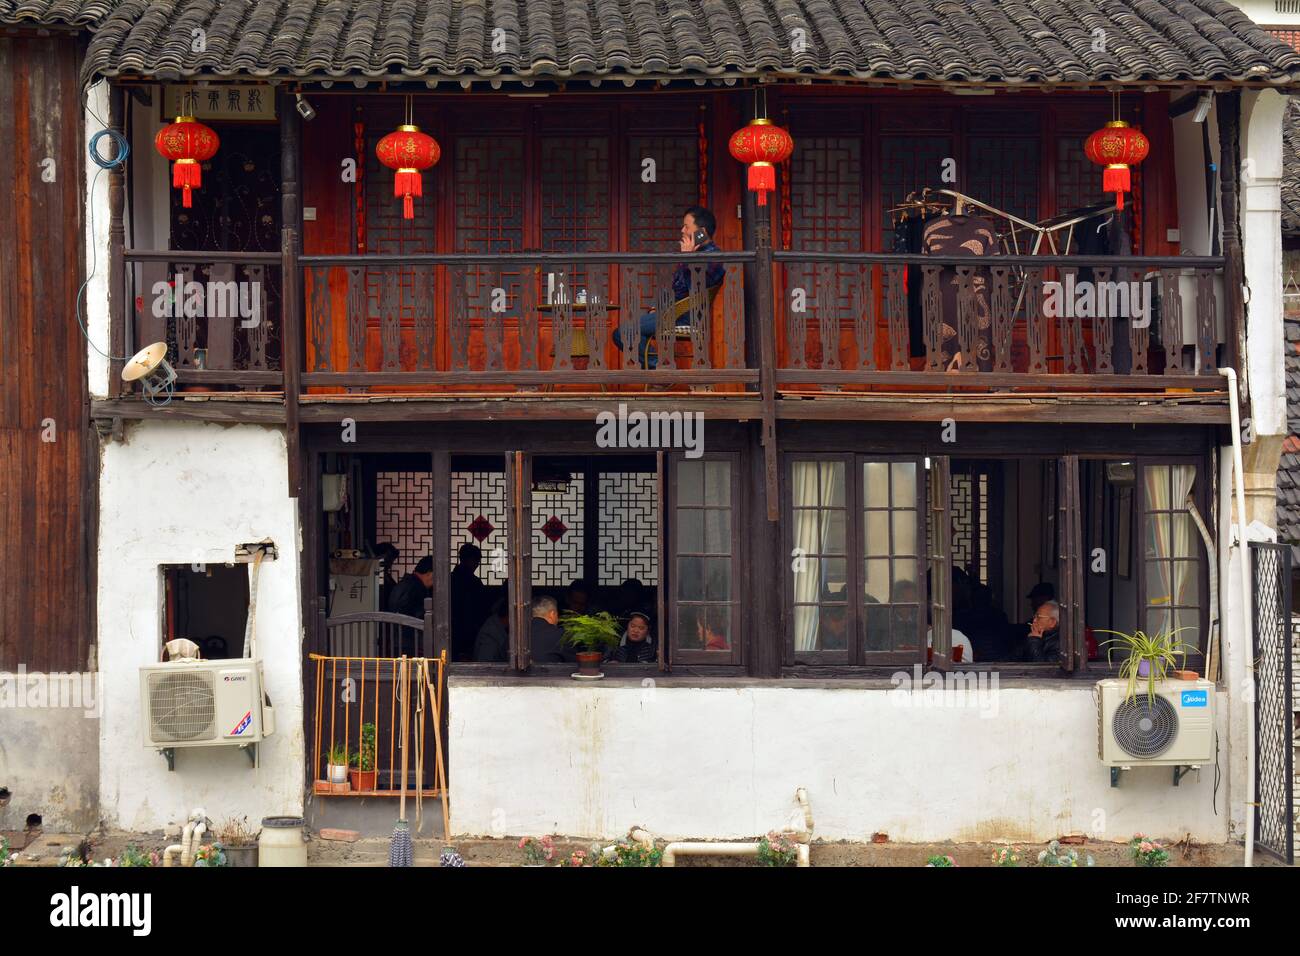 Everyday scene in a local Chinese community. This old building has many people doing different things both upstairs and downstairs. Stock Photo